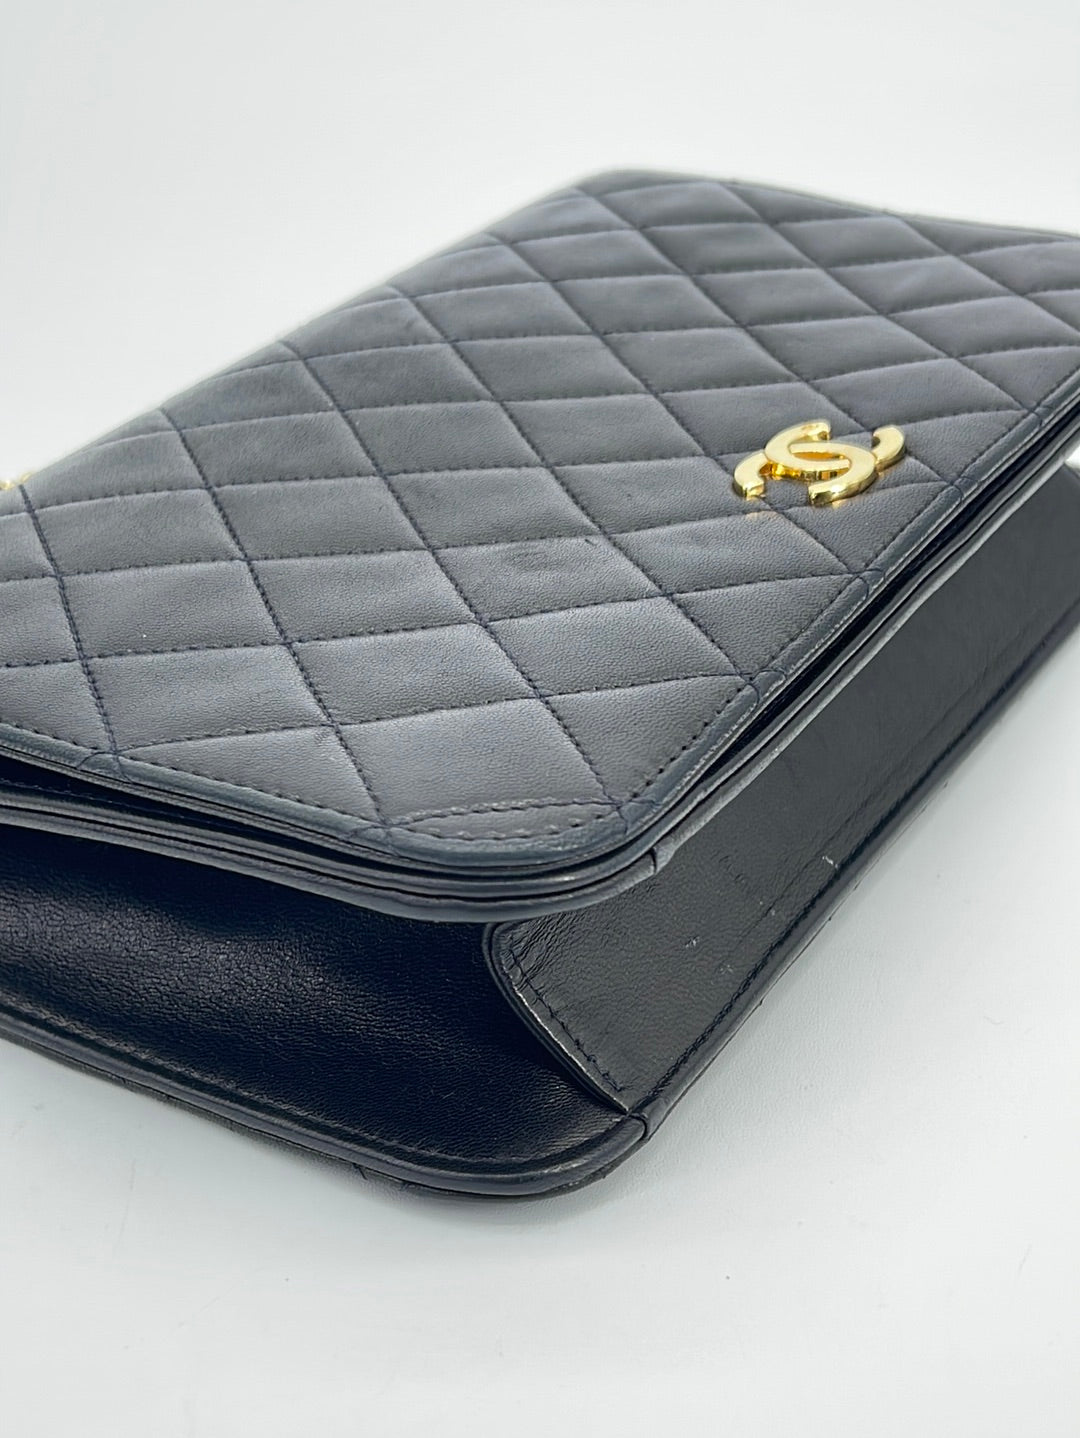 GIFTABLE Vintage Chanel Black Quilted Lambskin Full Single Flap Shoulder Bag with 24k Gold Plated Hardware 3981785 072623